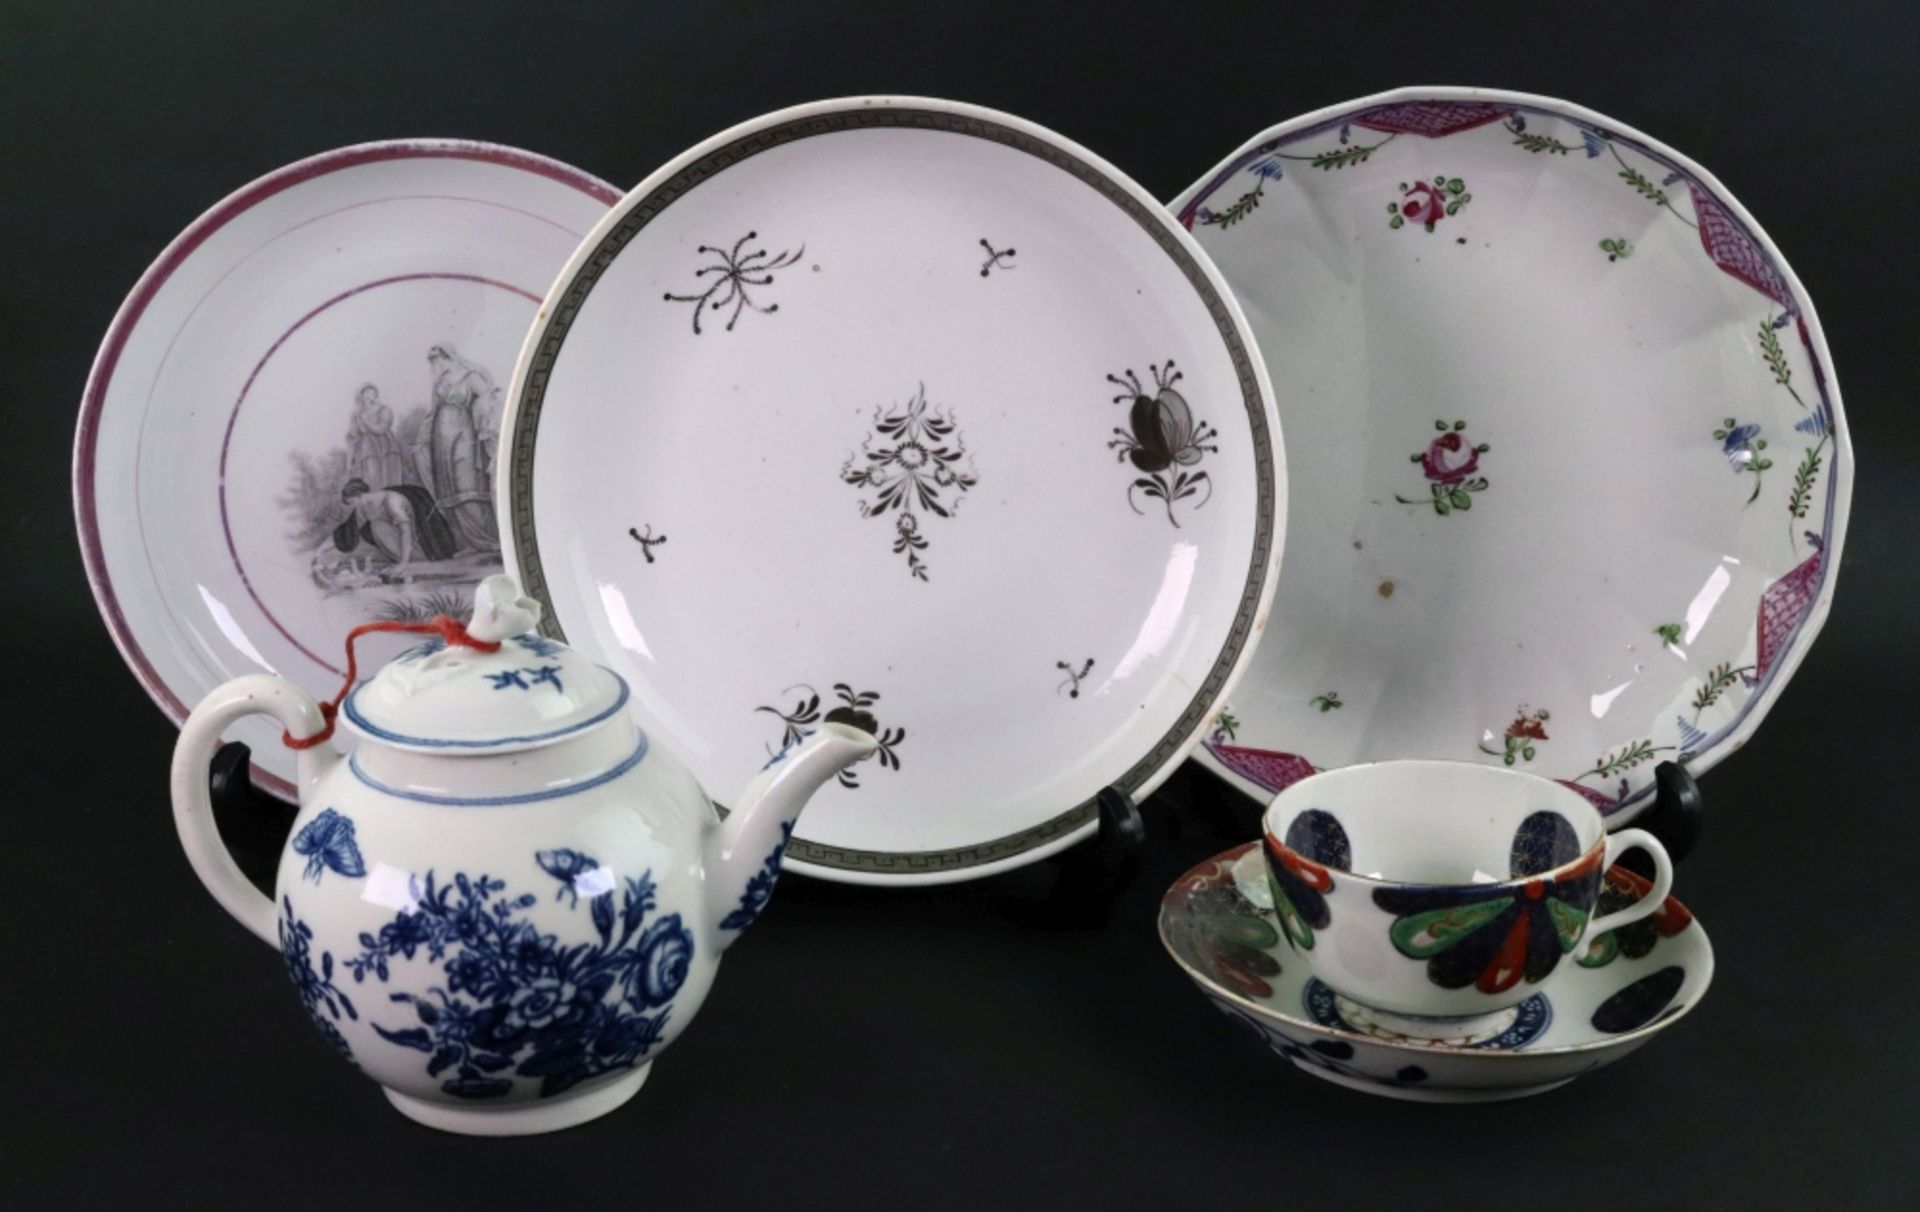 A group of English porcelain, late 18th/.